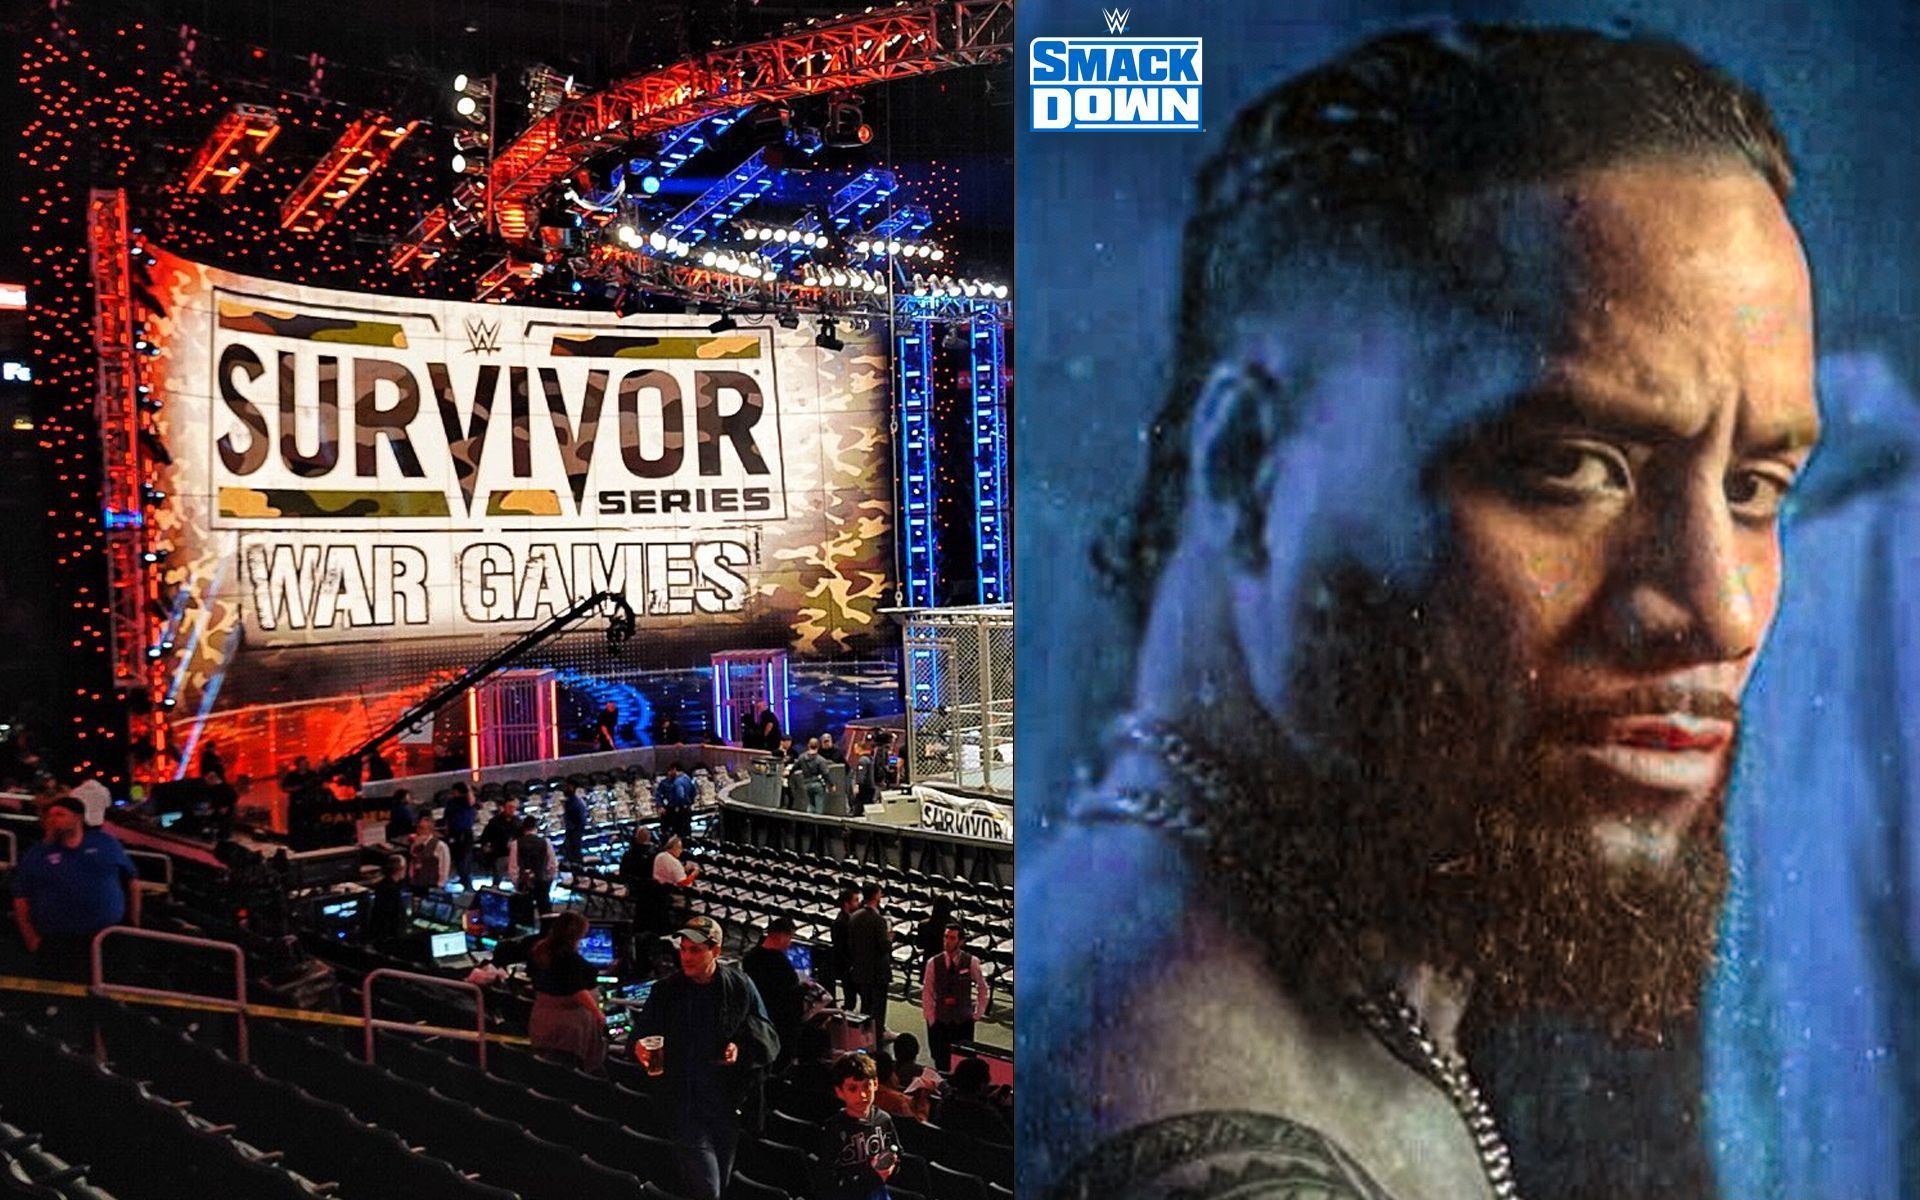 Survivor Series 2023 is set to take place on Saturday, November 25, 2023, at the Allstate Arena in the Chicago suburb of Rosemont, Illinois,